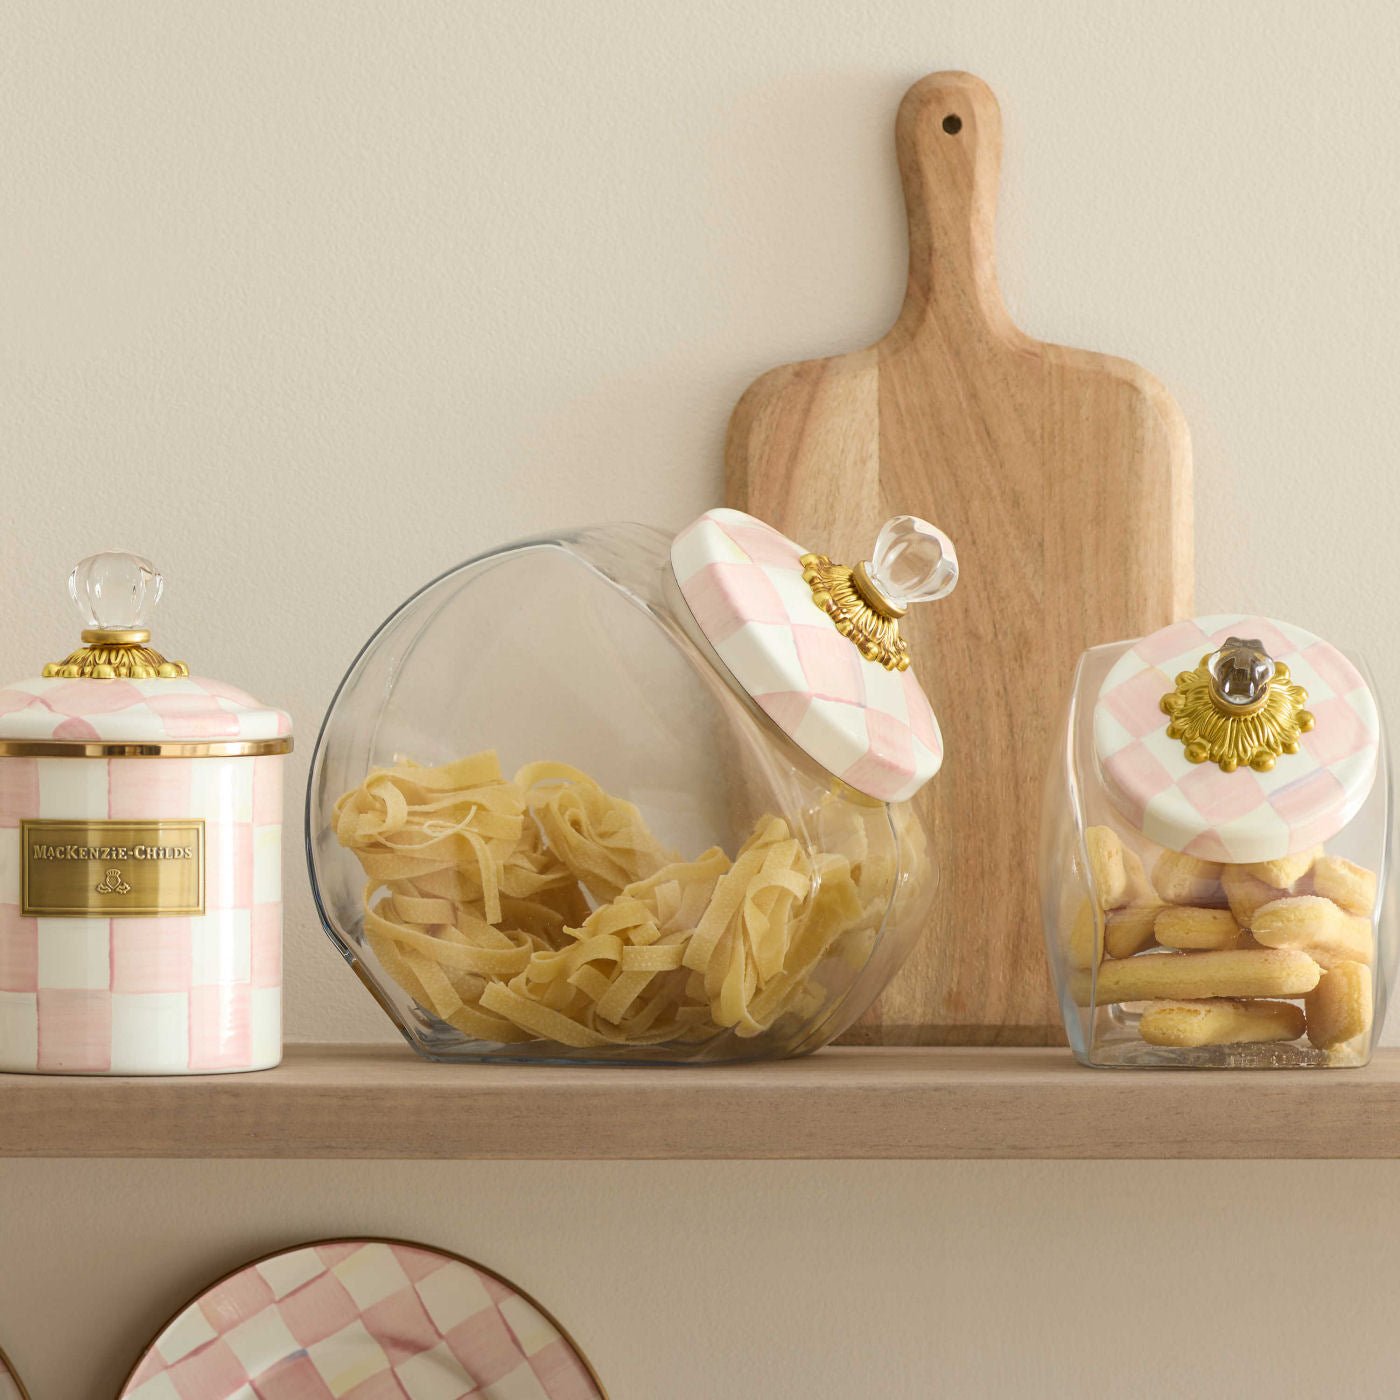 Sweets Jar with Rosy Check Enamel Lid by MacKenzie-Childs - |VESIMI Design|